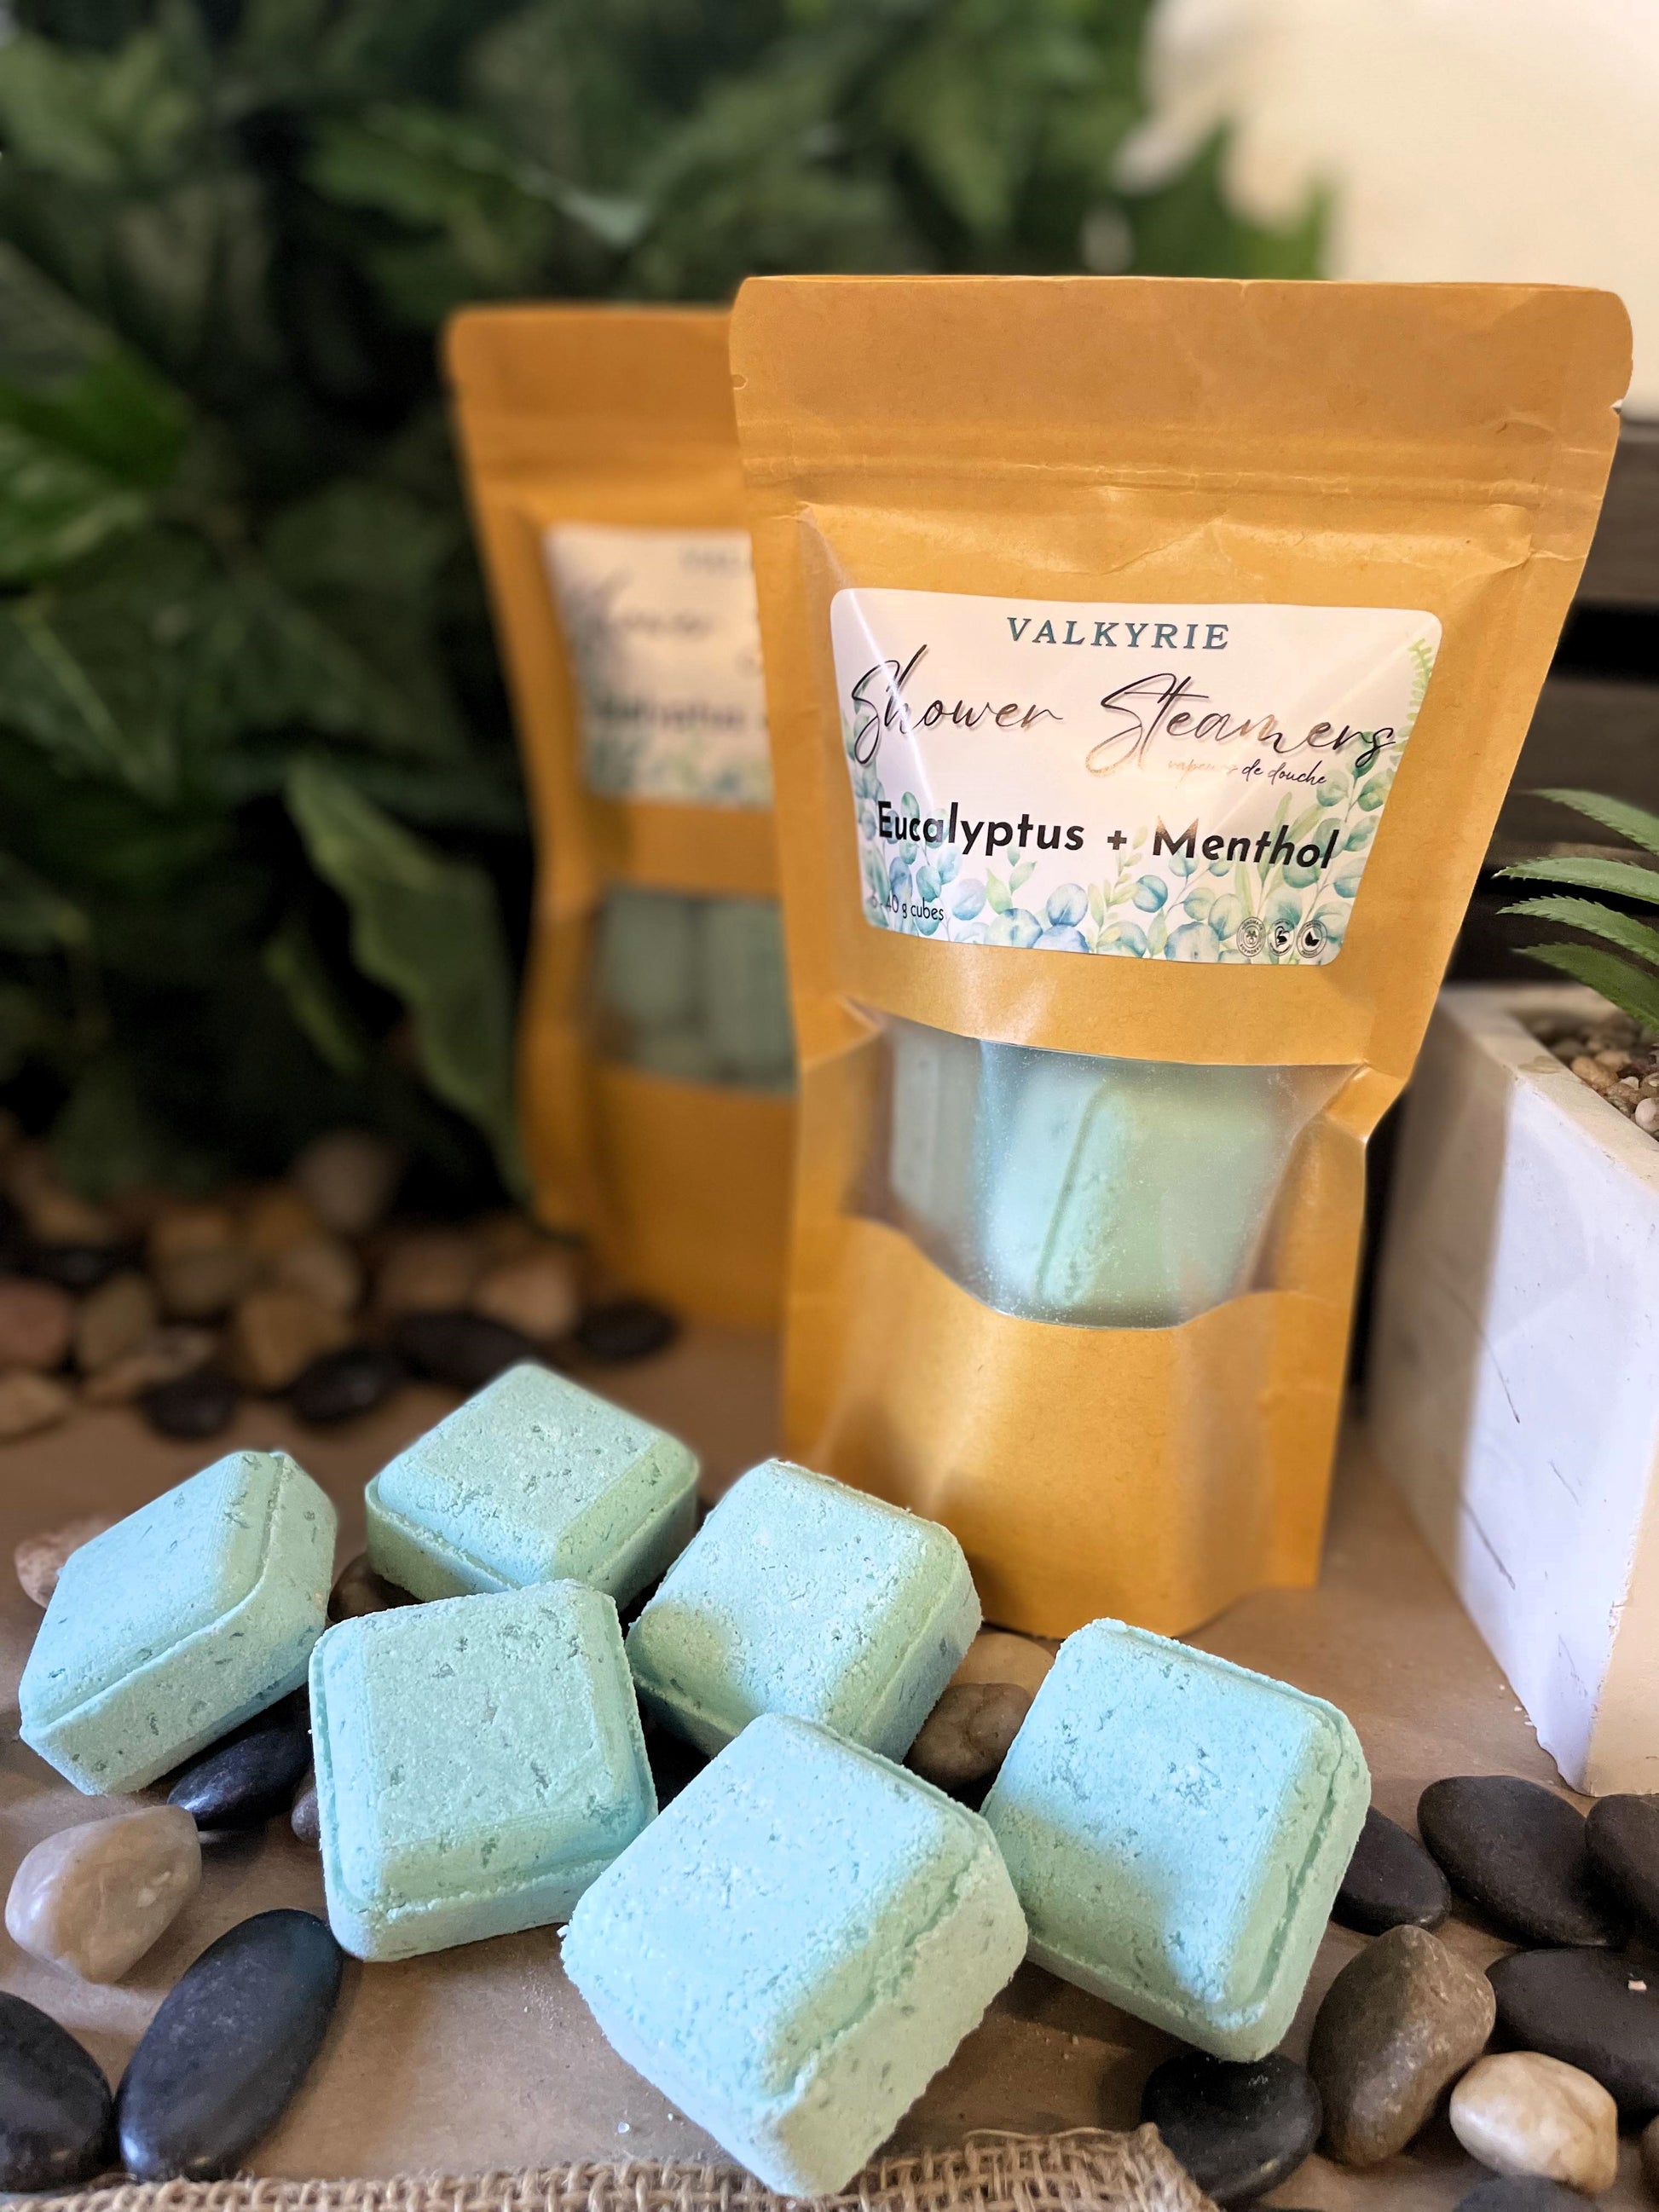 Eucalyptus + Menthol - Shower Steamers Valkyrie Global Natural Skin Care Self Care Beauty St. Catharines Ontario Canada